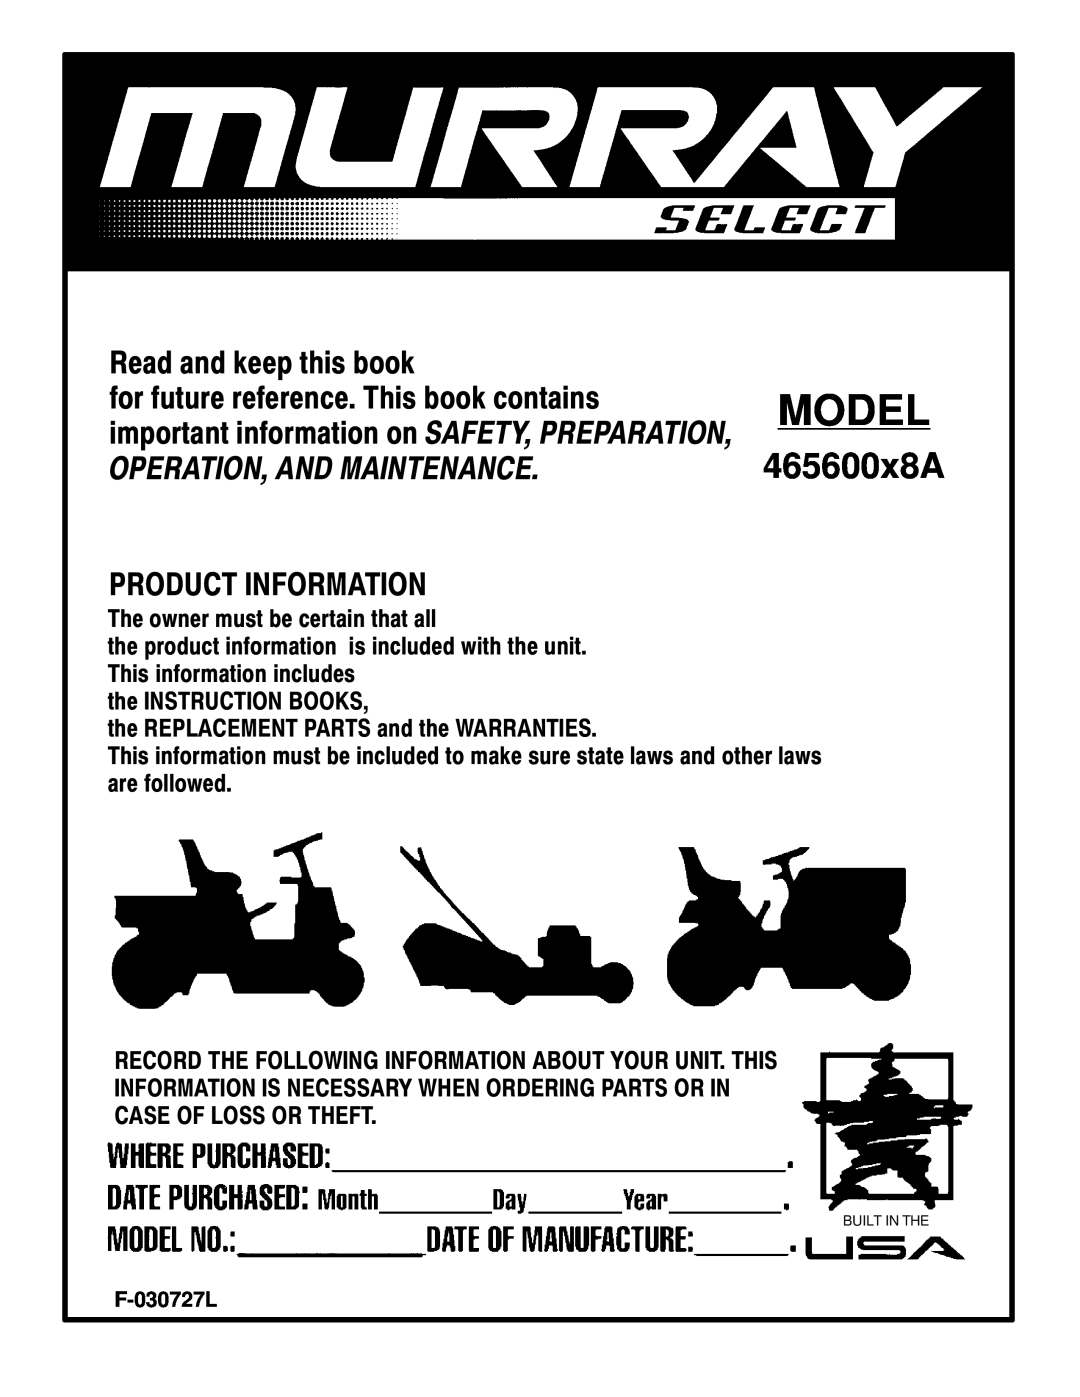 Murray 465600x8A manual Model, Read and keep this book, Product Information 